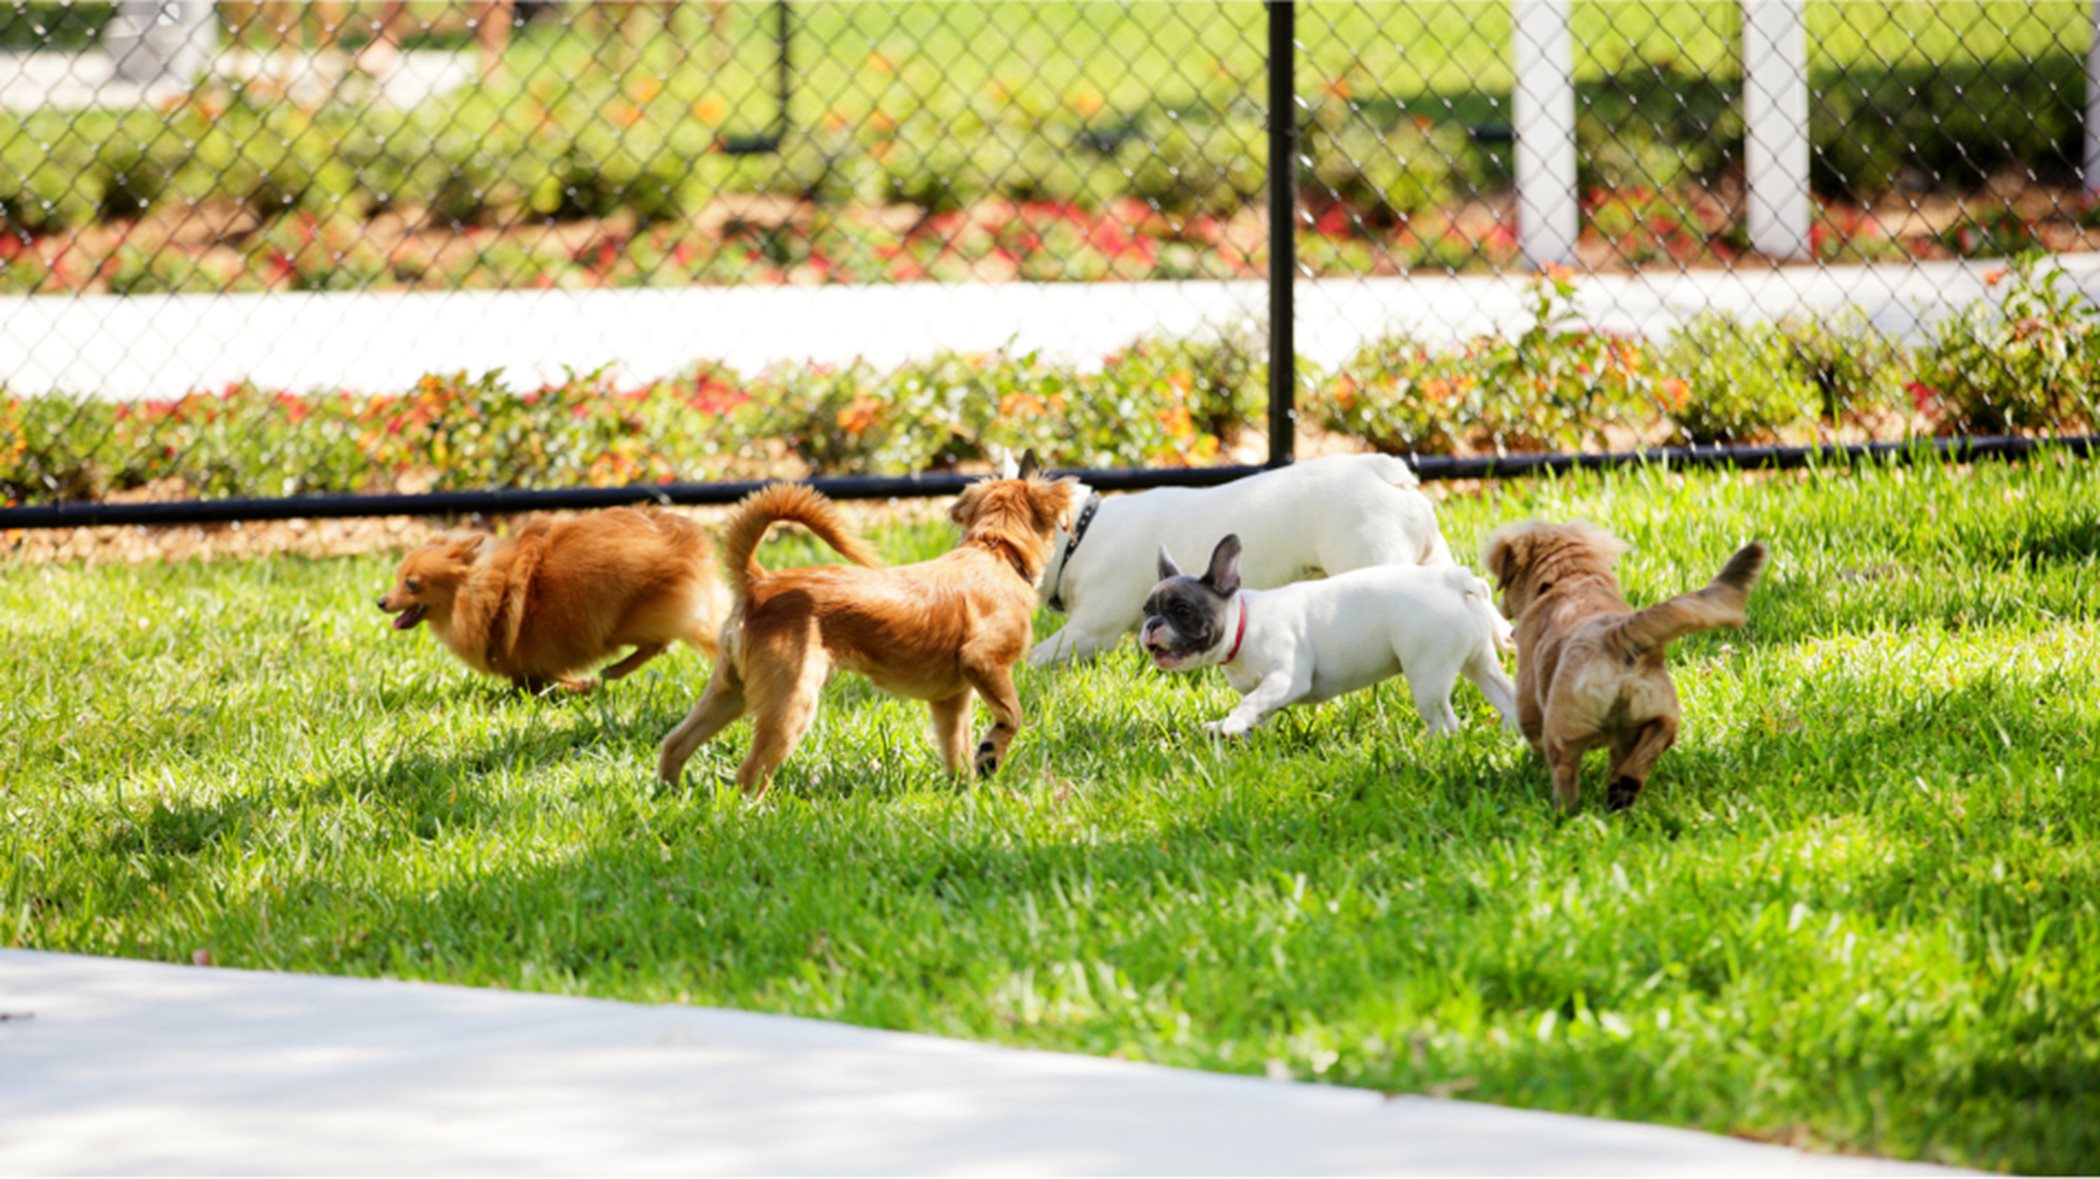 Group of small dogs playing the grass